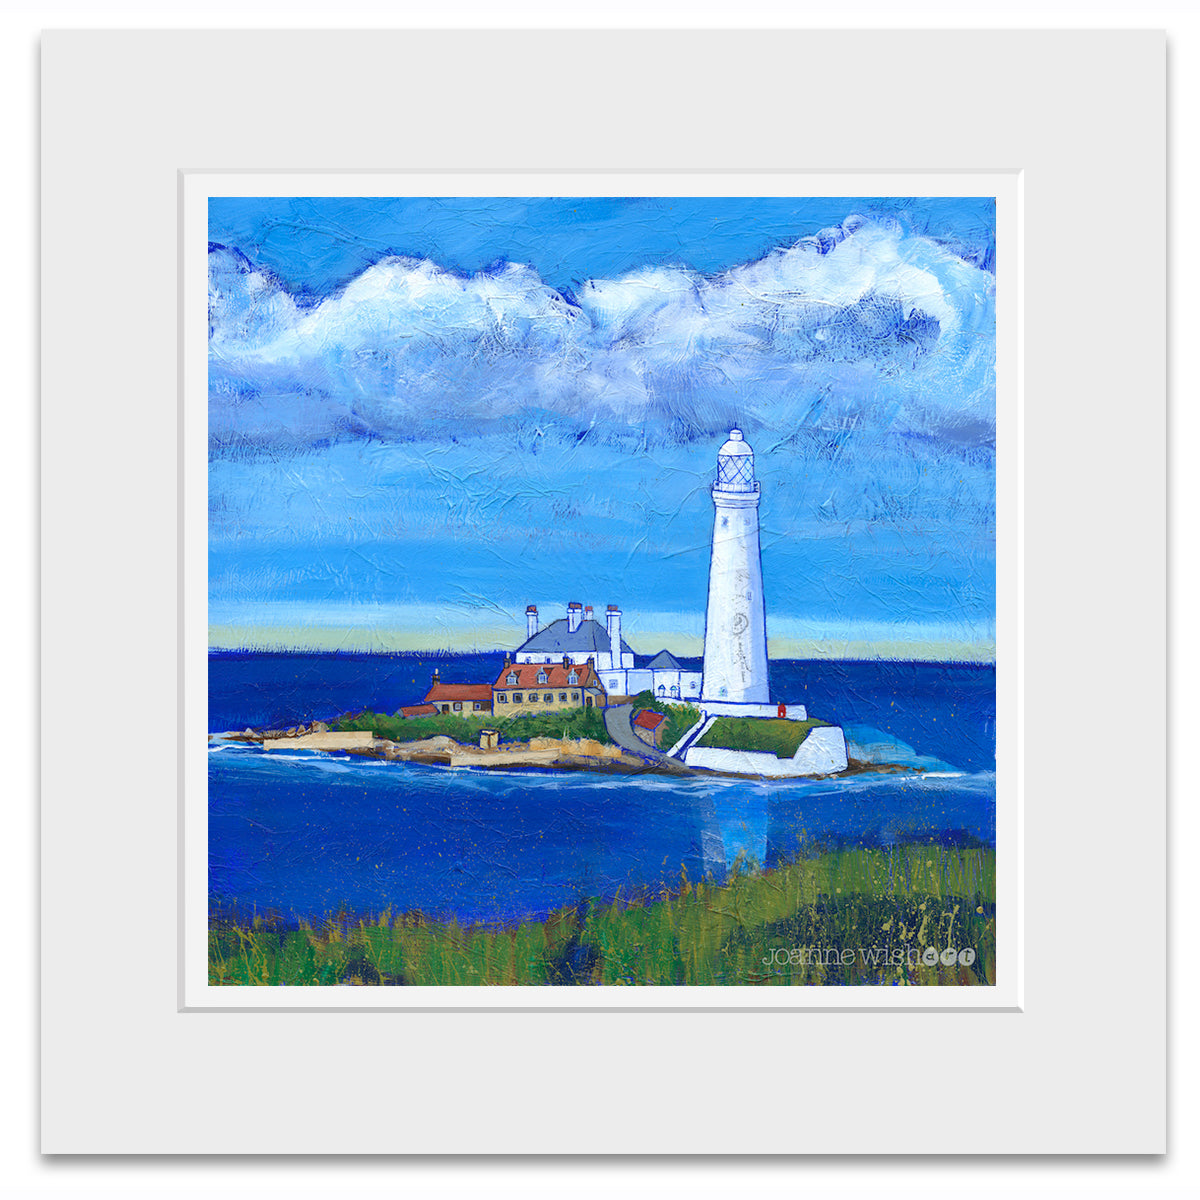 A mounted print of St Mary's island with a bold blue sea and sky.